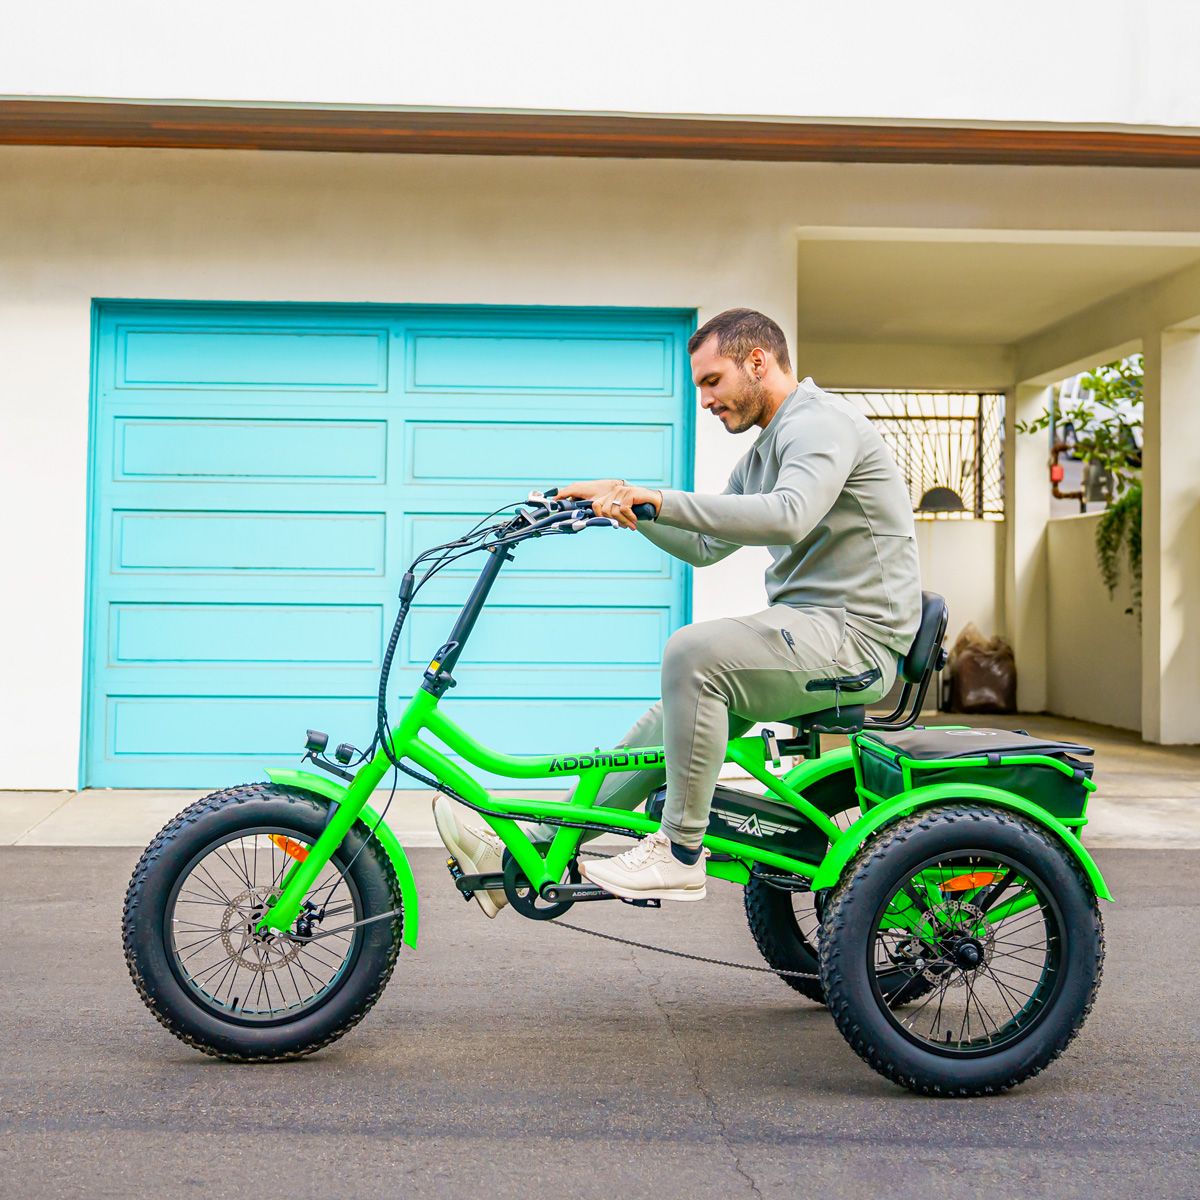 How can adult electric trike help people with disabilities?